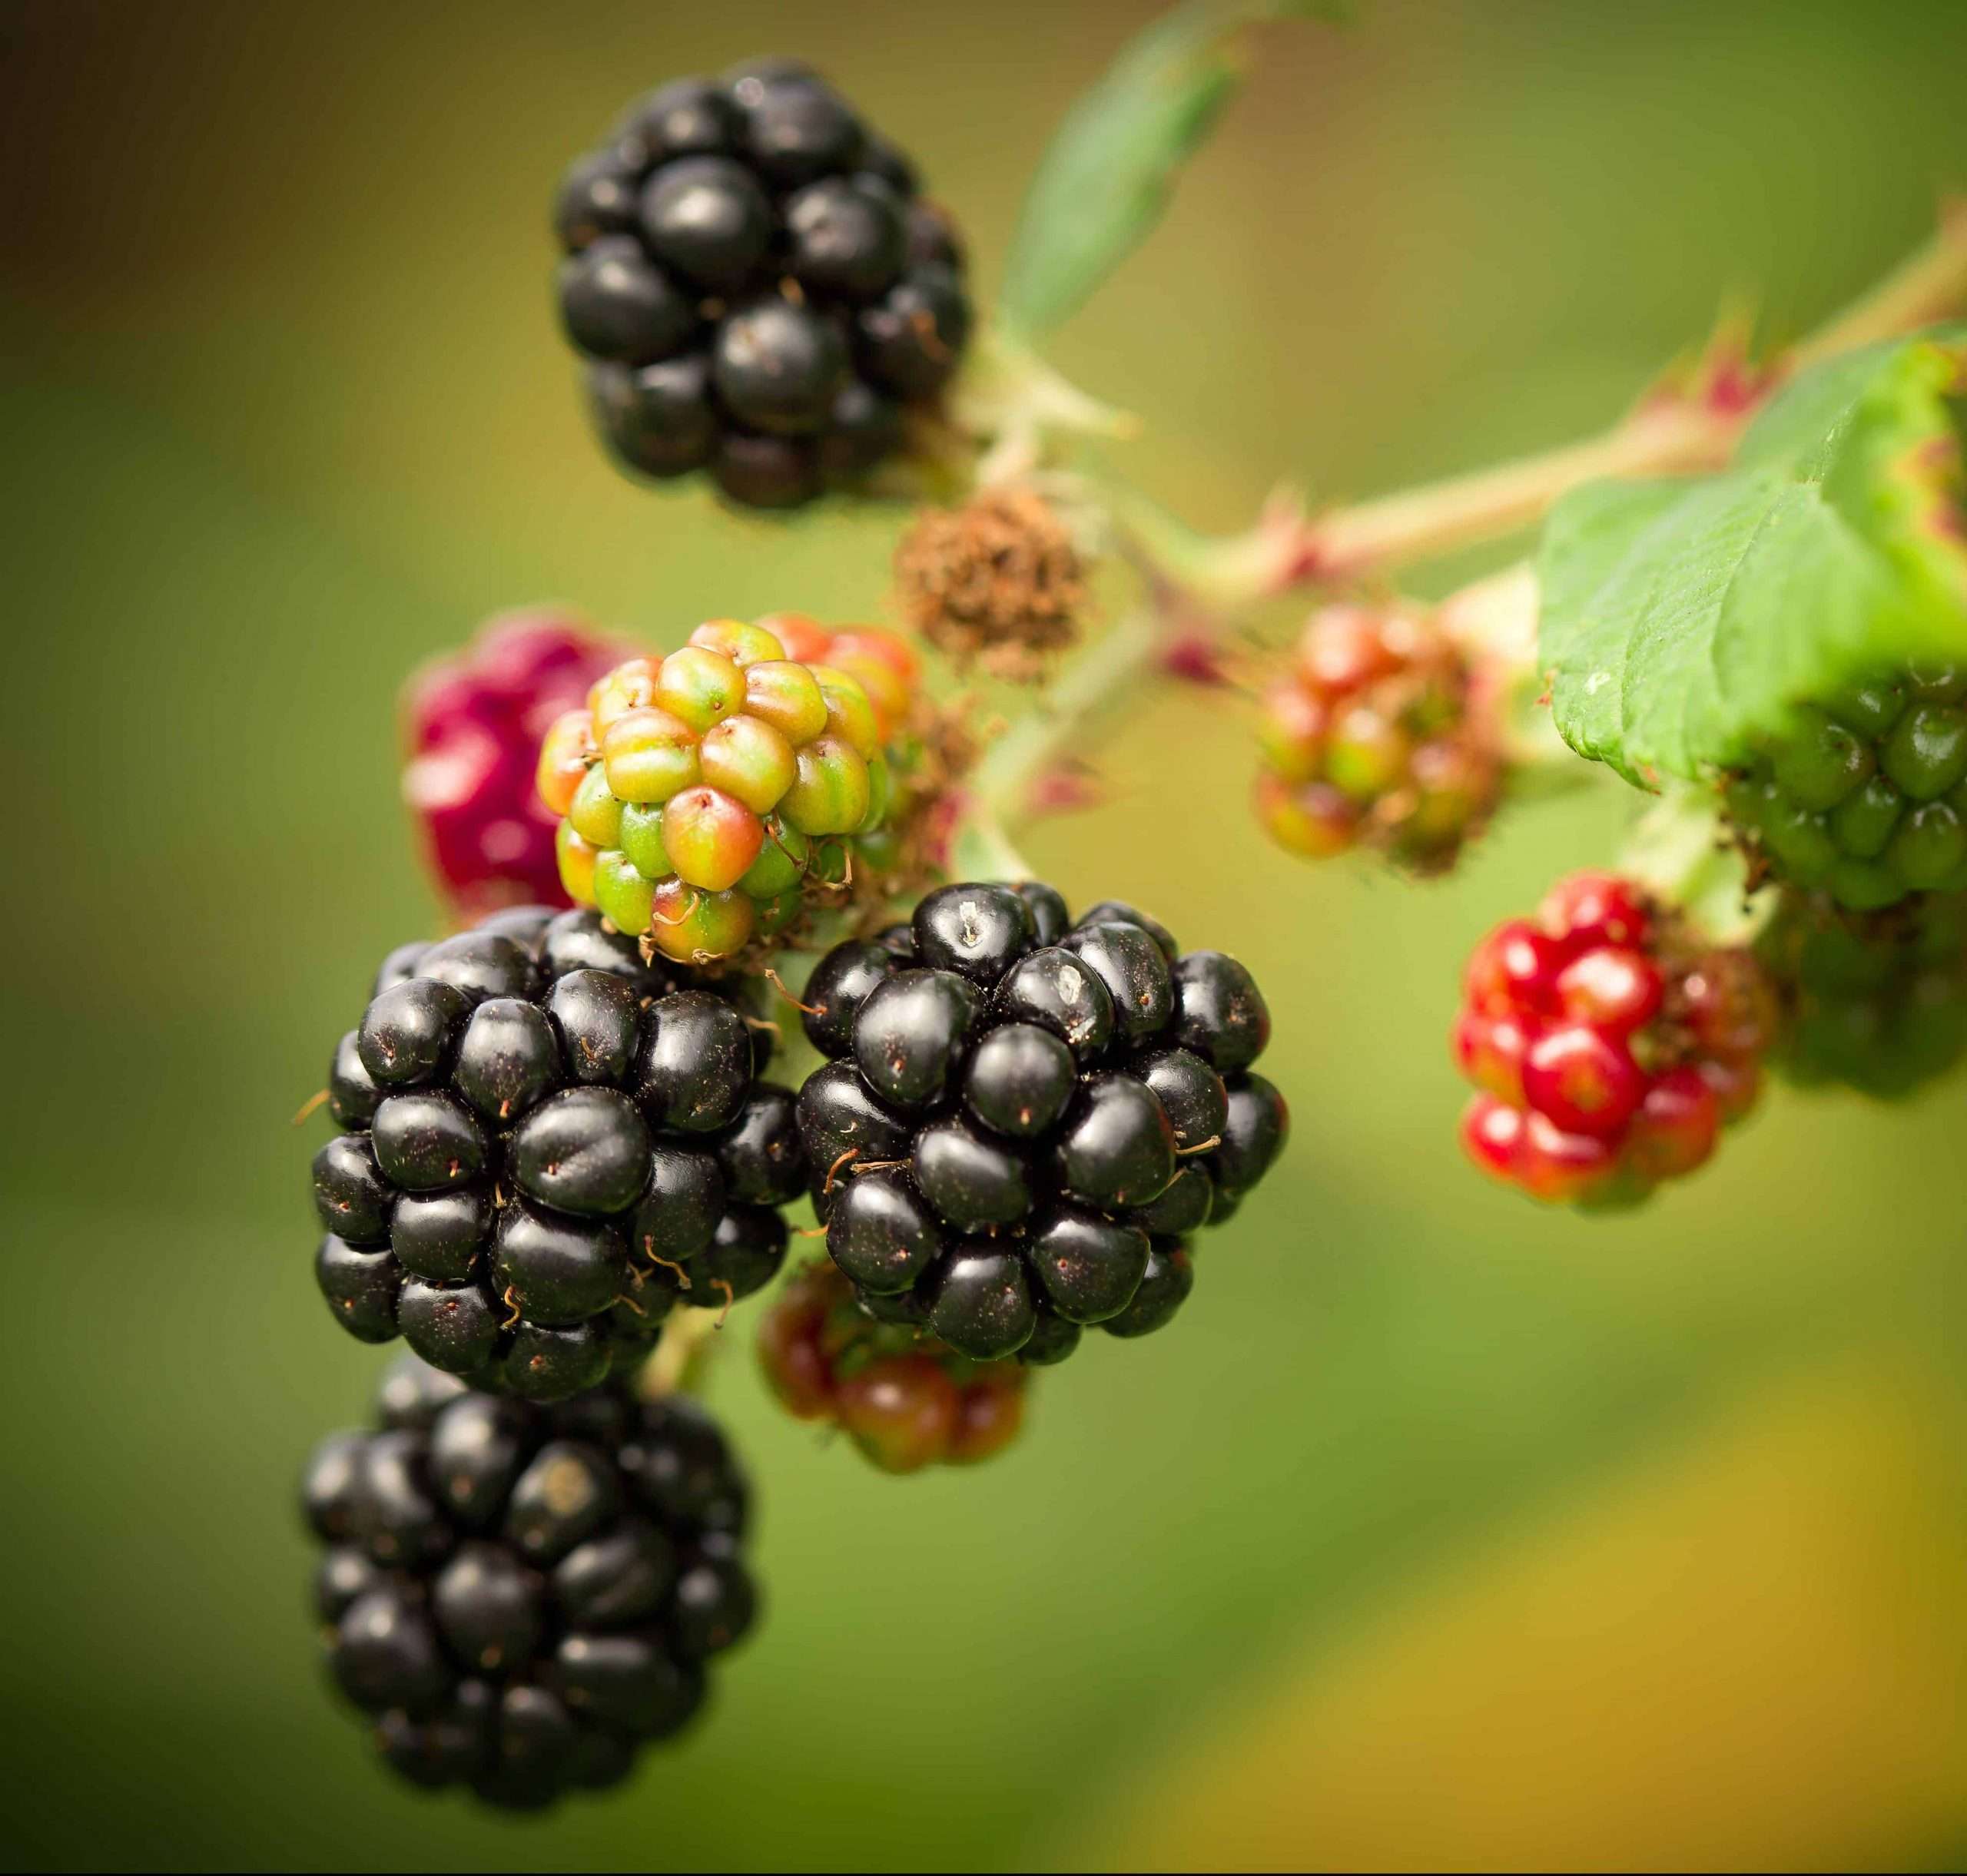 Check out these 7 easy steps to propagate blackberries in order to increase your crops. These thornless or tame blackberries solve the problem of dealing with all the thorns. #blackberries #blackberry #propagateblackberries